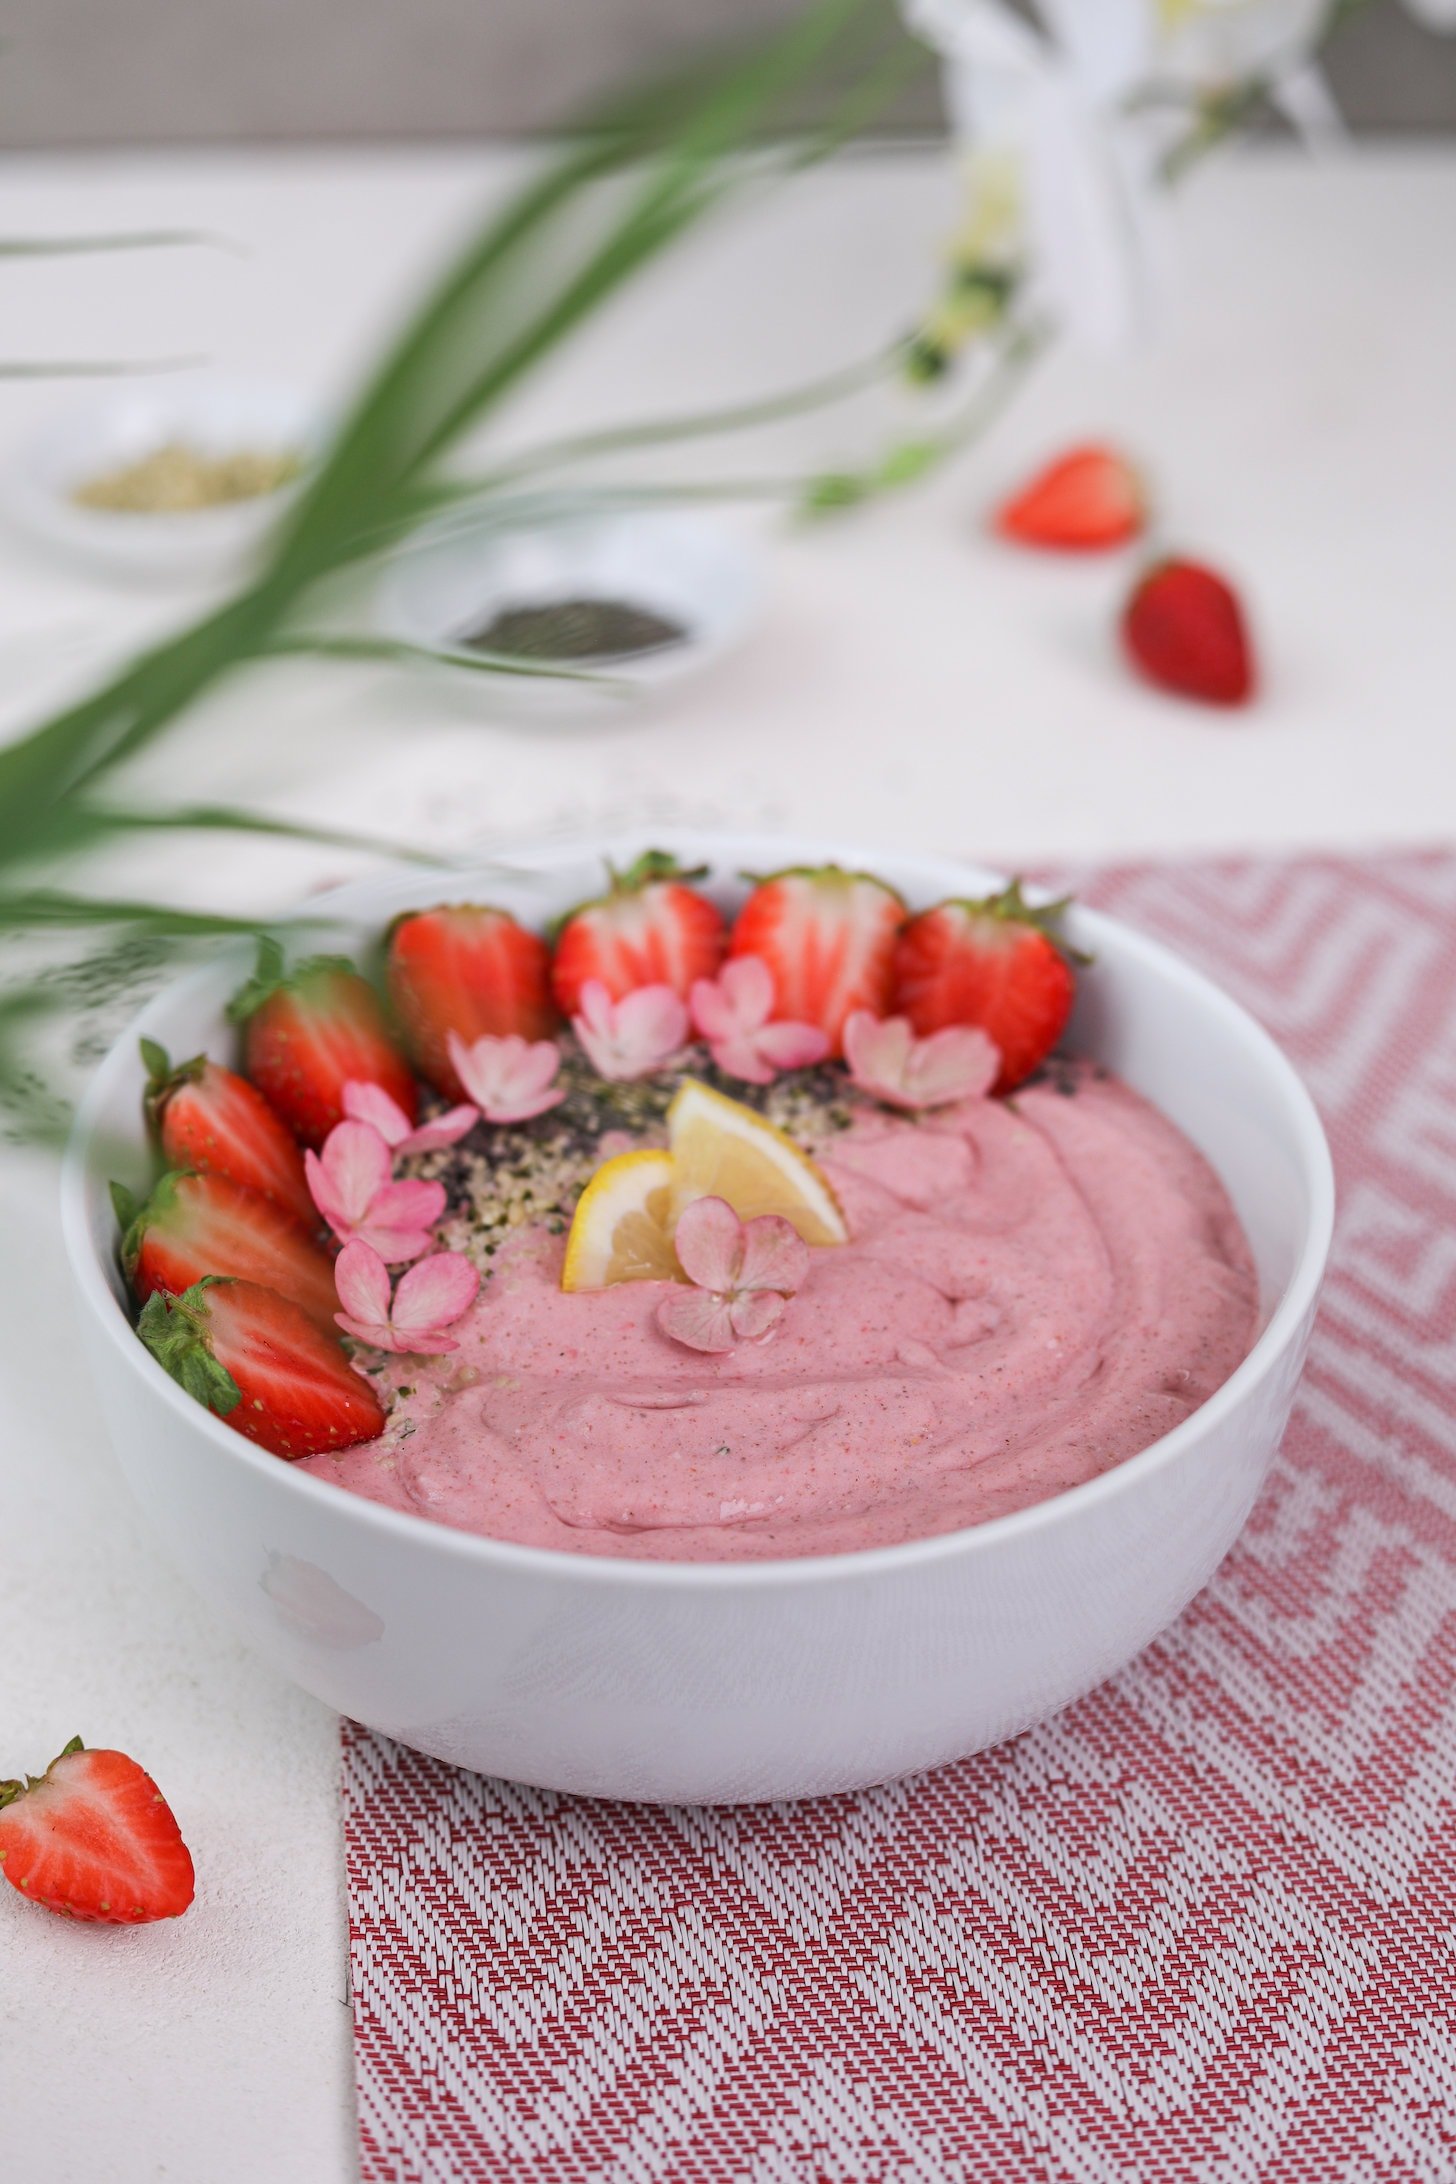 Perspective image of a pink smoothie topped with strawberry halves, lemon segments and pink flowers. It's placed on a pink mat with ramekins of seeds in the background.